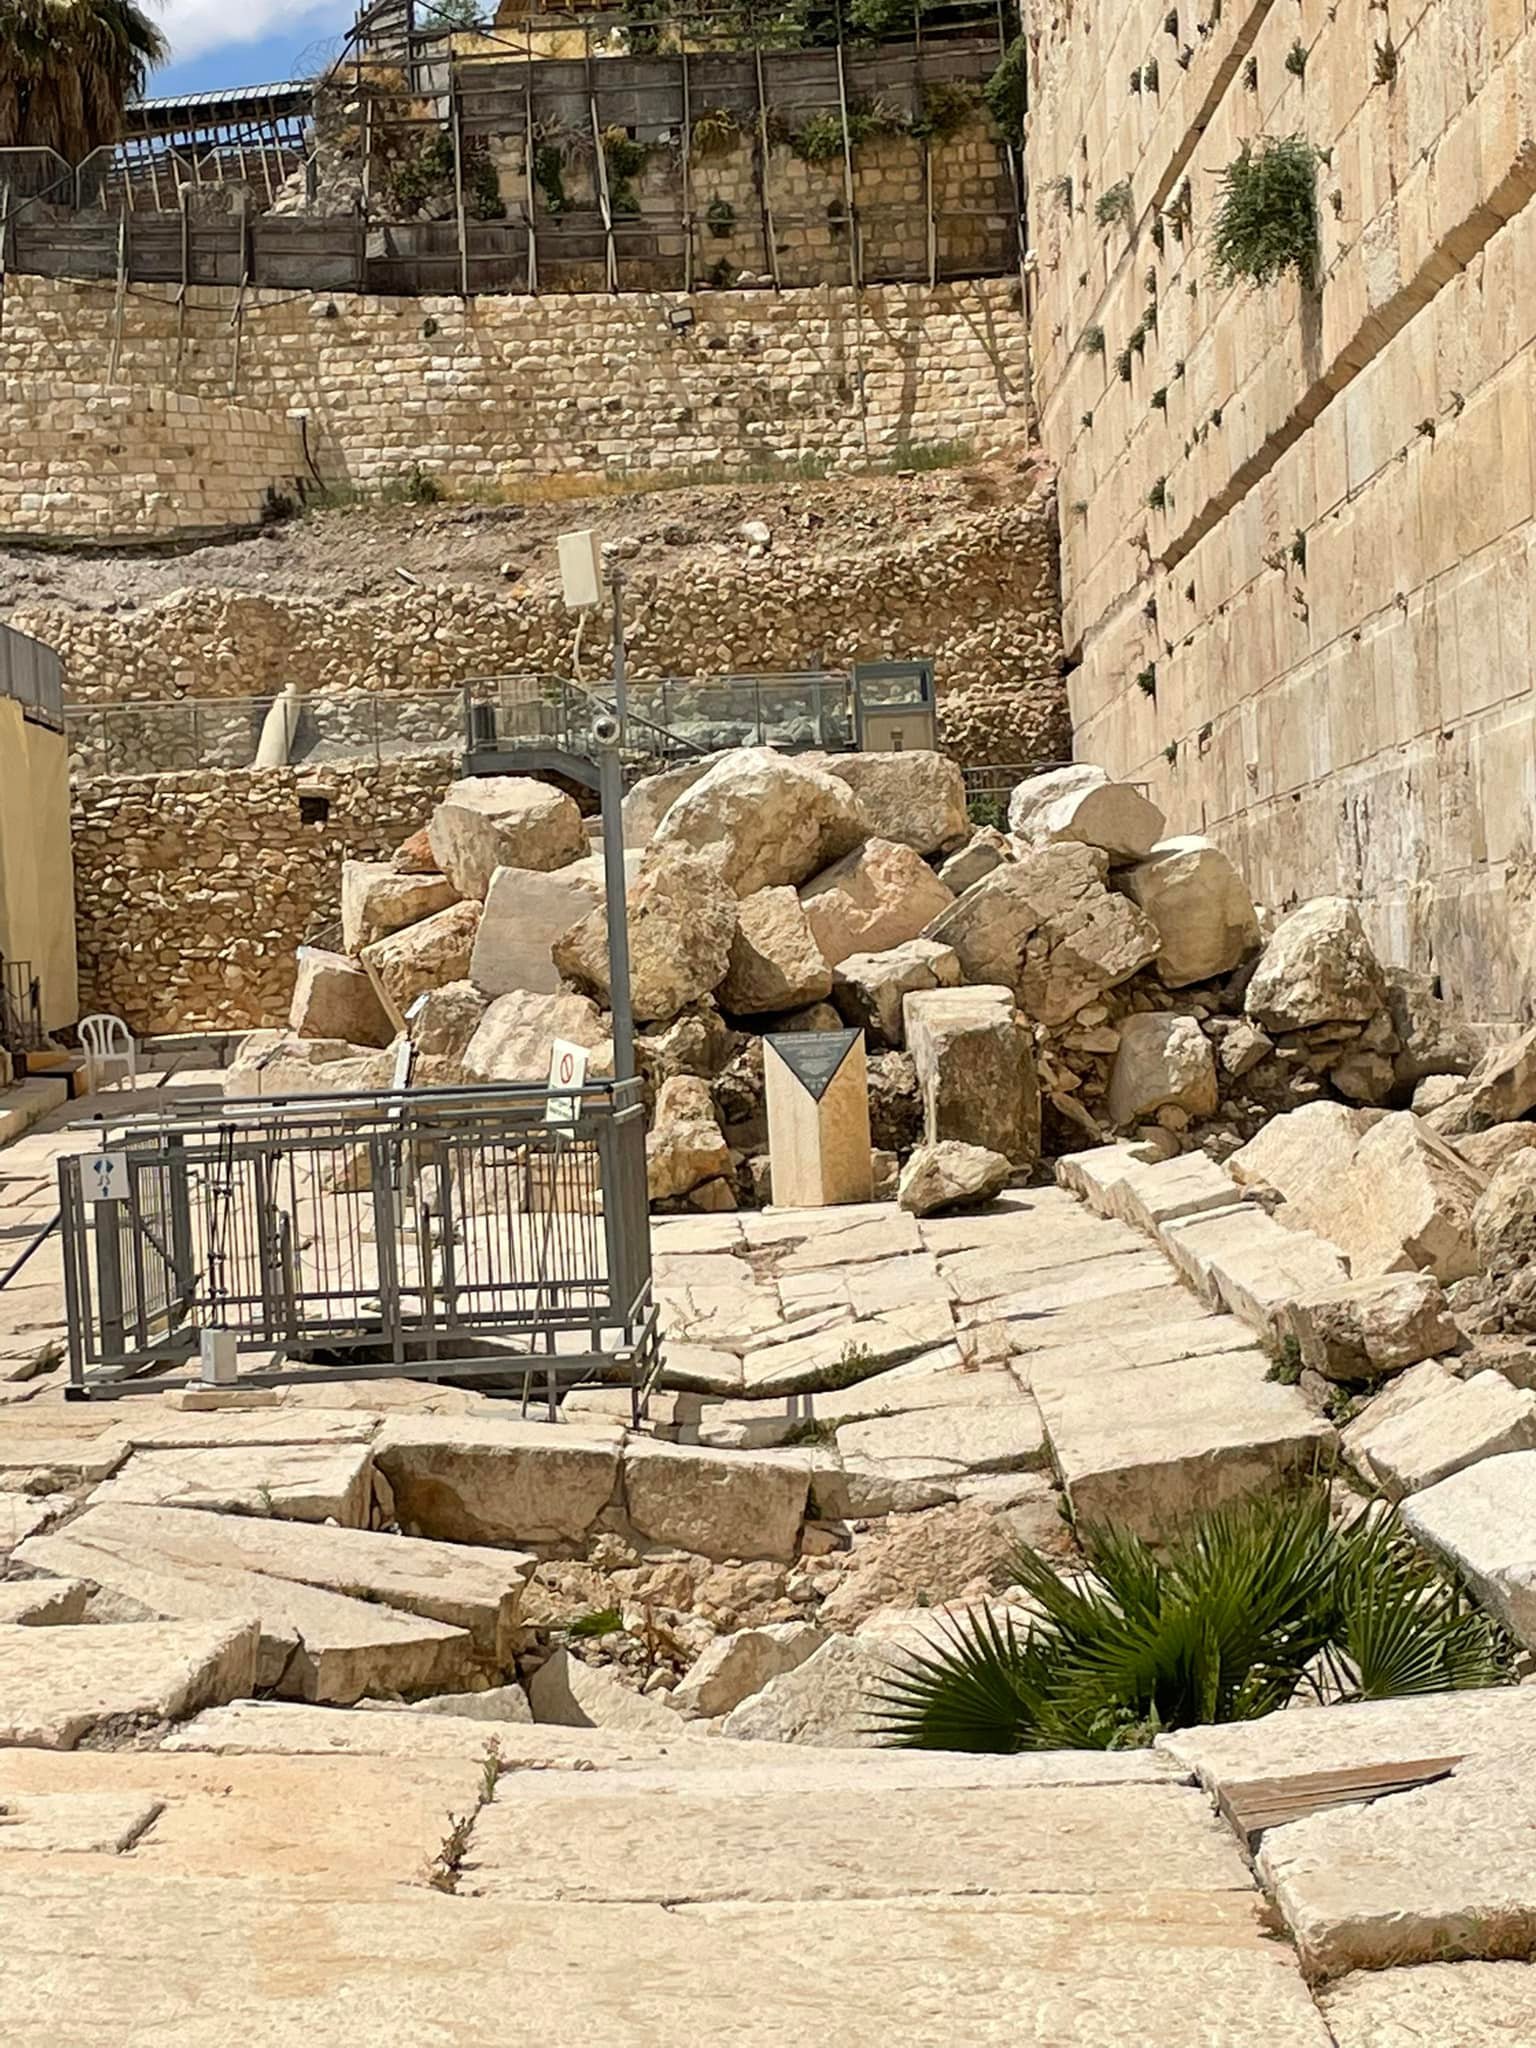  Jesus told his disciples that the temple would be destroyed to the point where not one stone was left upon another. That happened, and these are stones that were thrown down from the top of the wall. Not one is left upon another. And these are all f